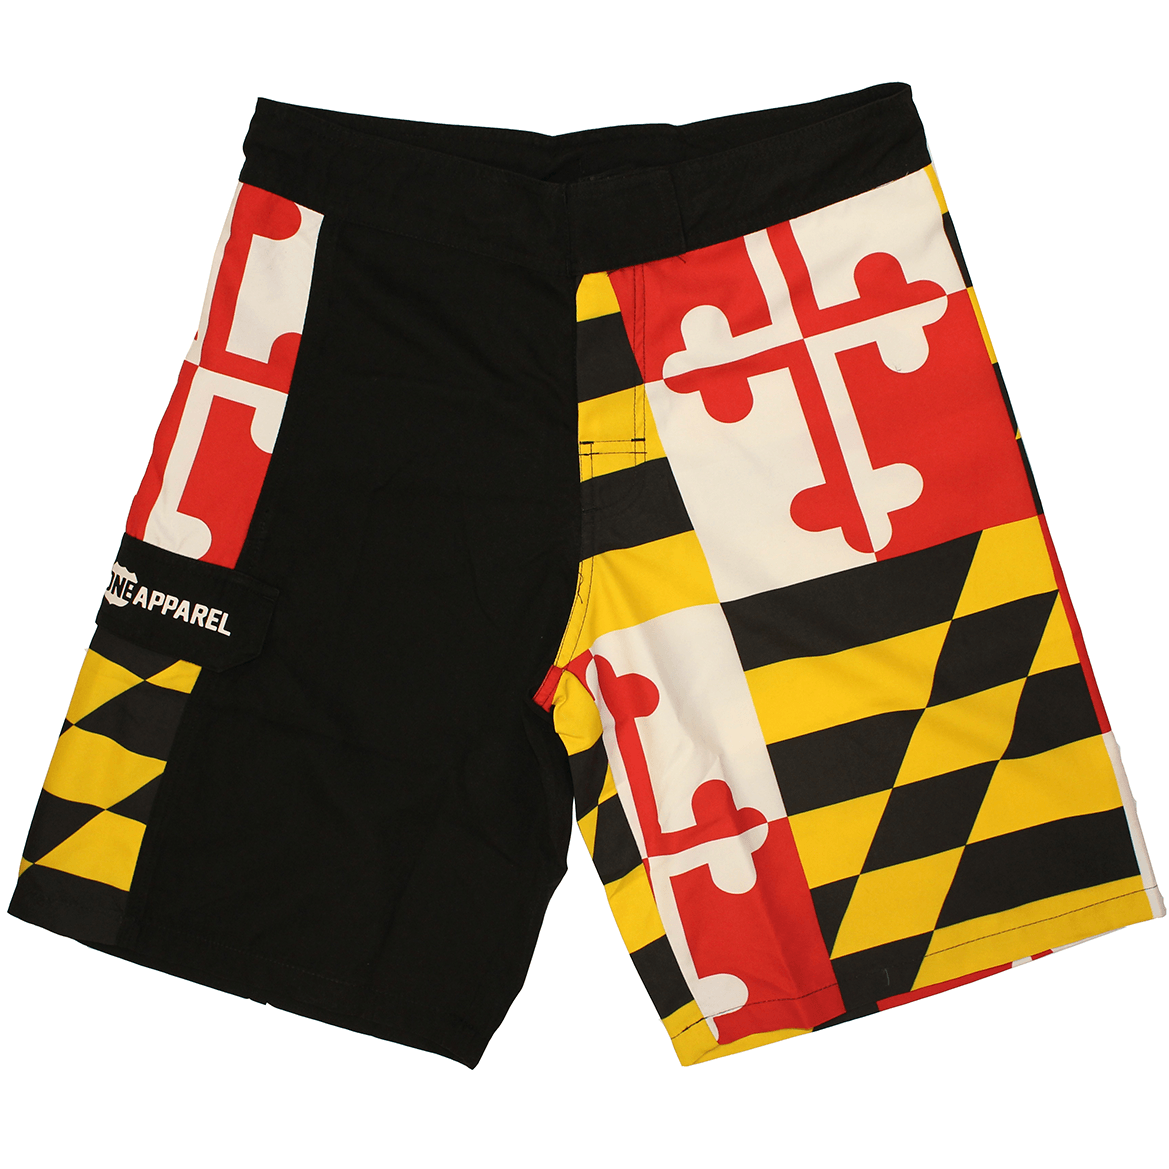 Maryland Flag (Black) / Board Shorts - Route One Apparel